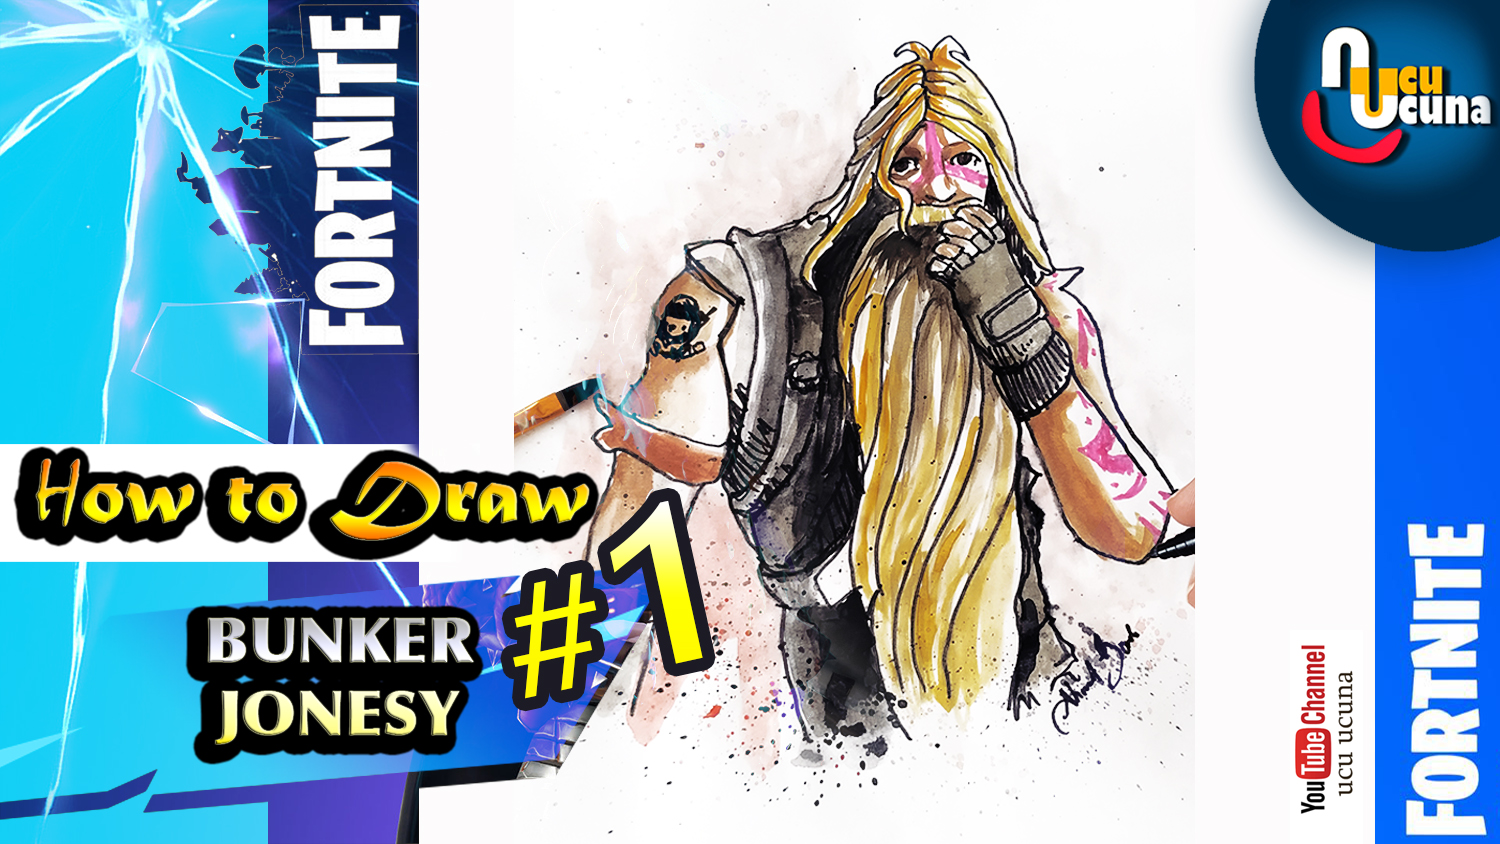 How to draw drift tutorial youtube channel name is ucu ucuna learn how to draw bunker jonesy fully upragaded from fortnite step by step beginner drawing tutorial of the bunker jonesy skin from fortnite